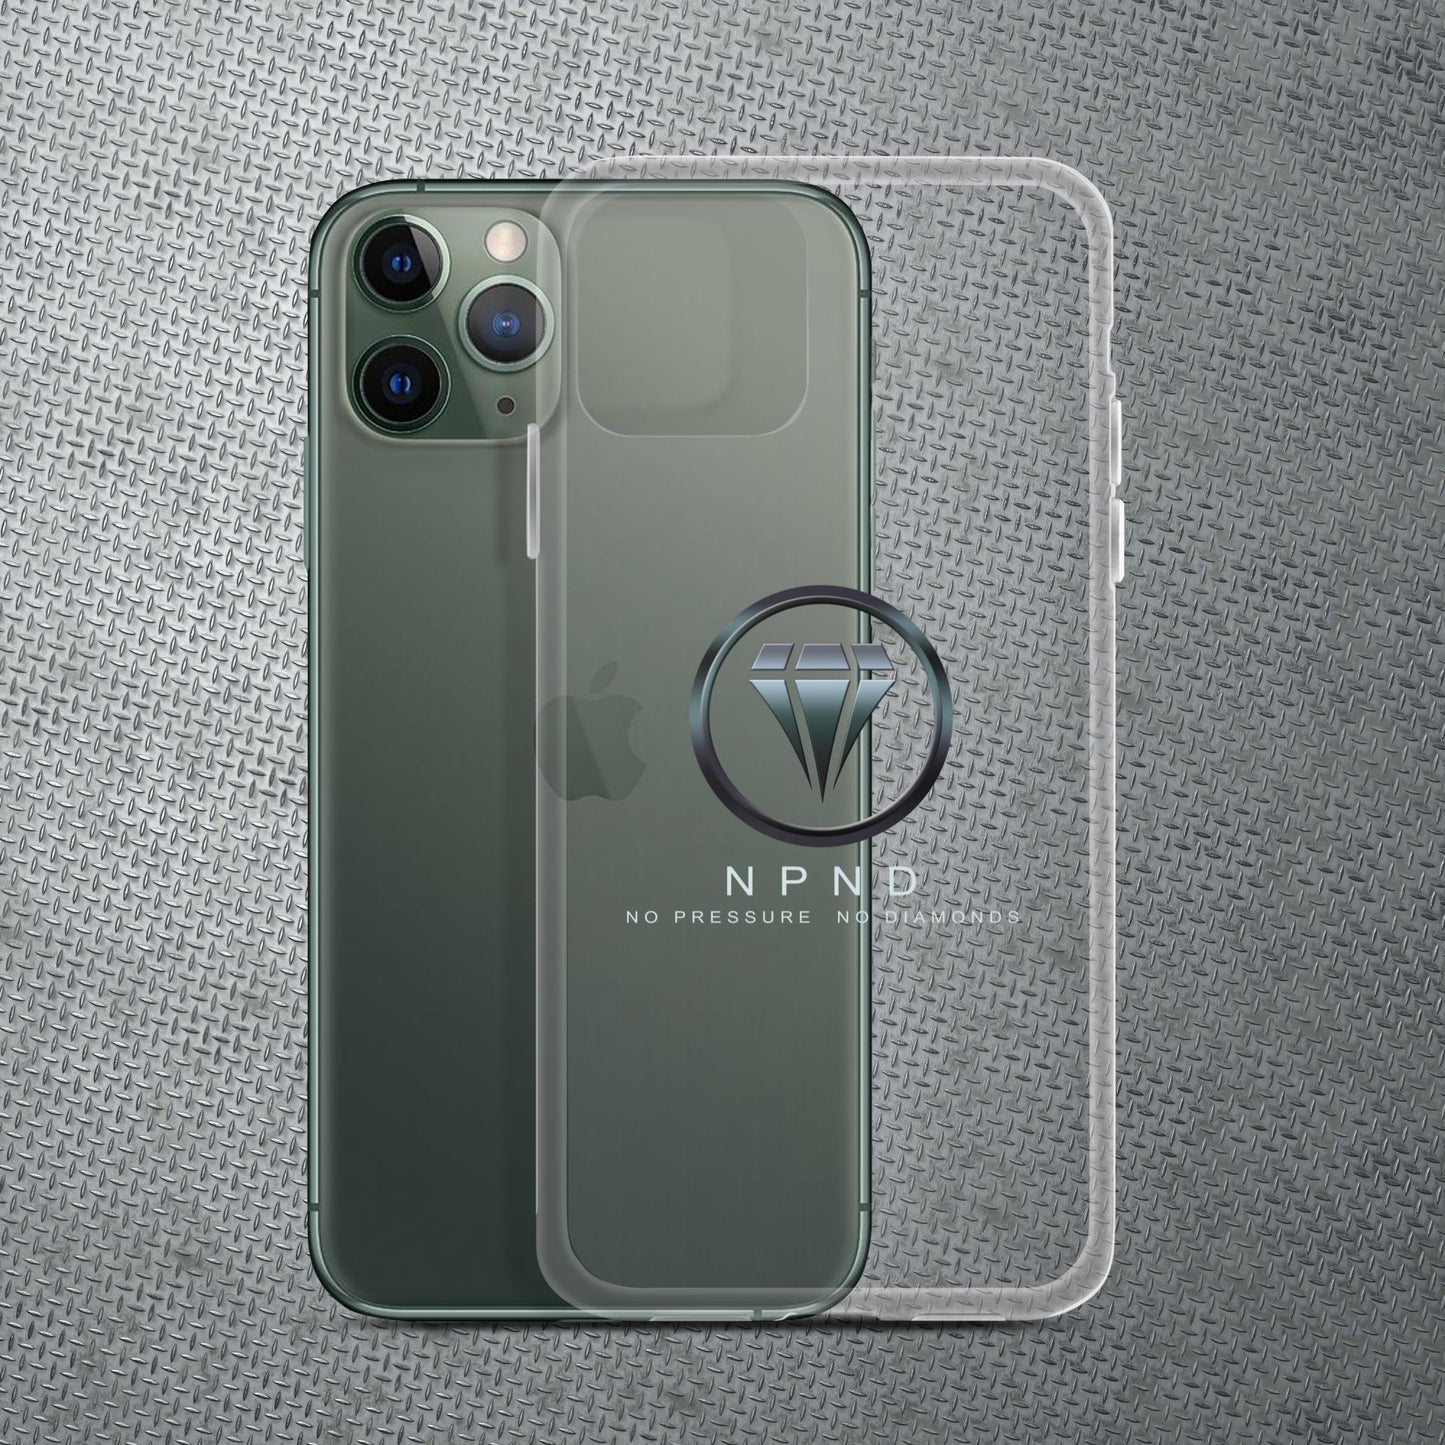 NPND Clear Case for iPhone®